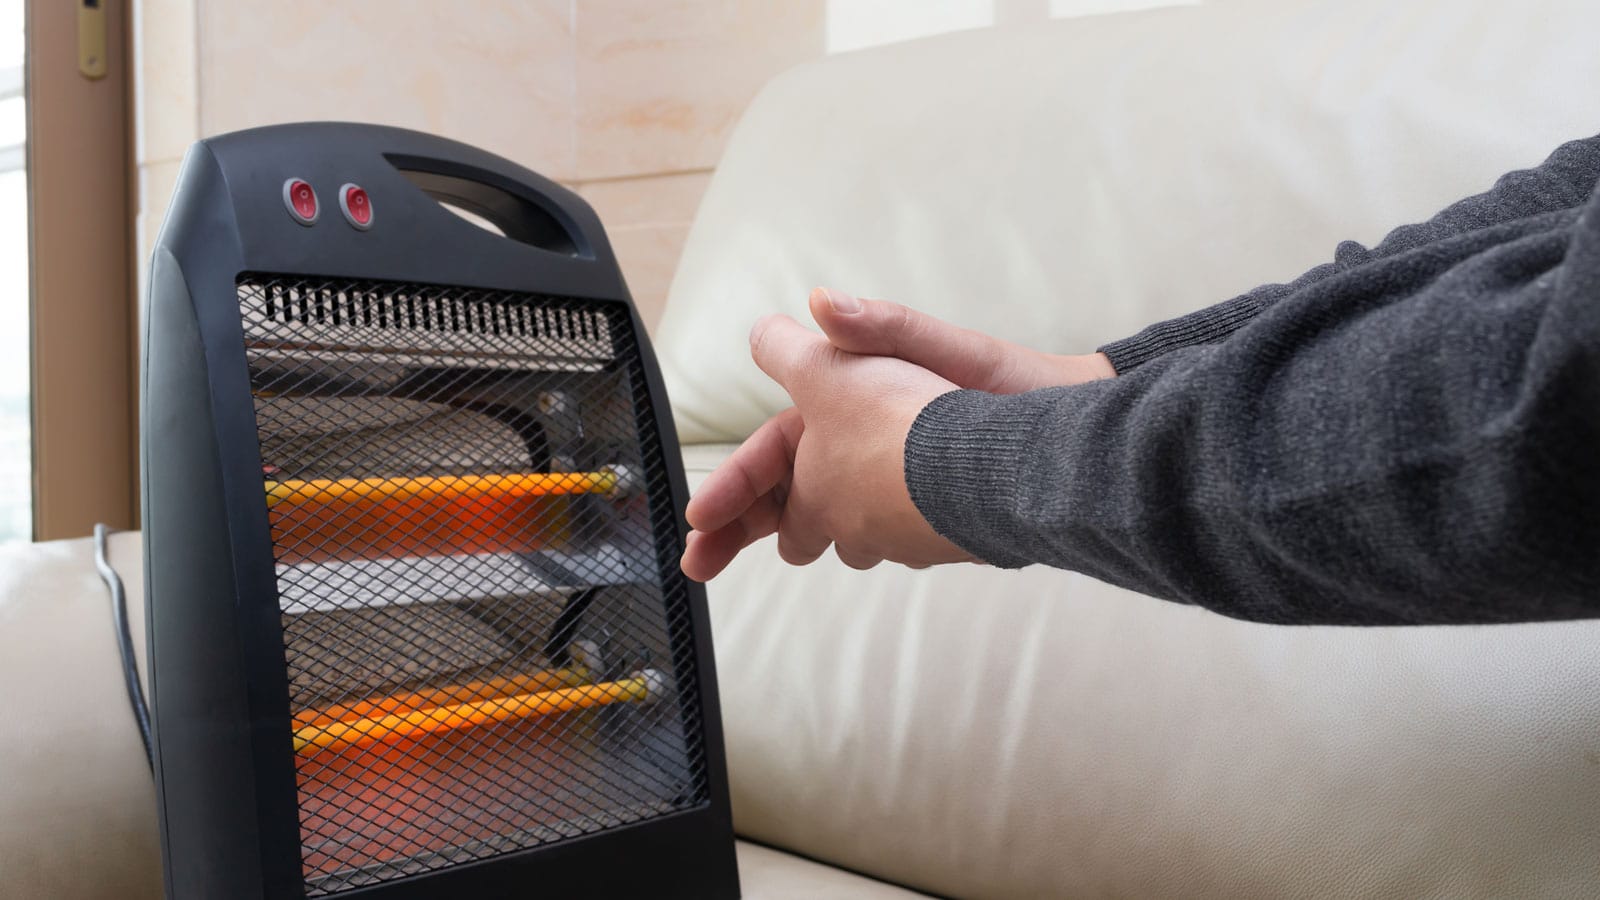 Man putting his hands close to the heater